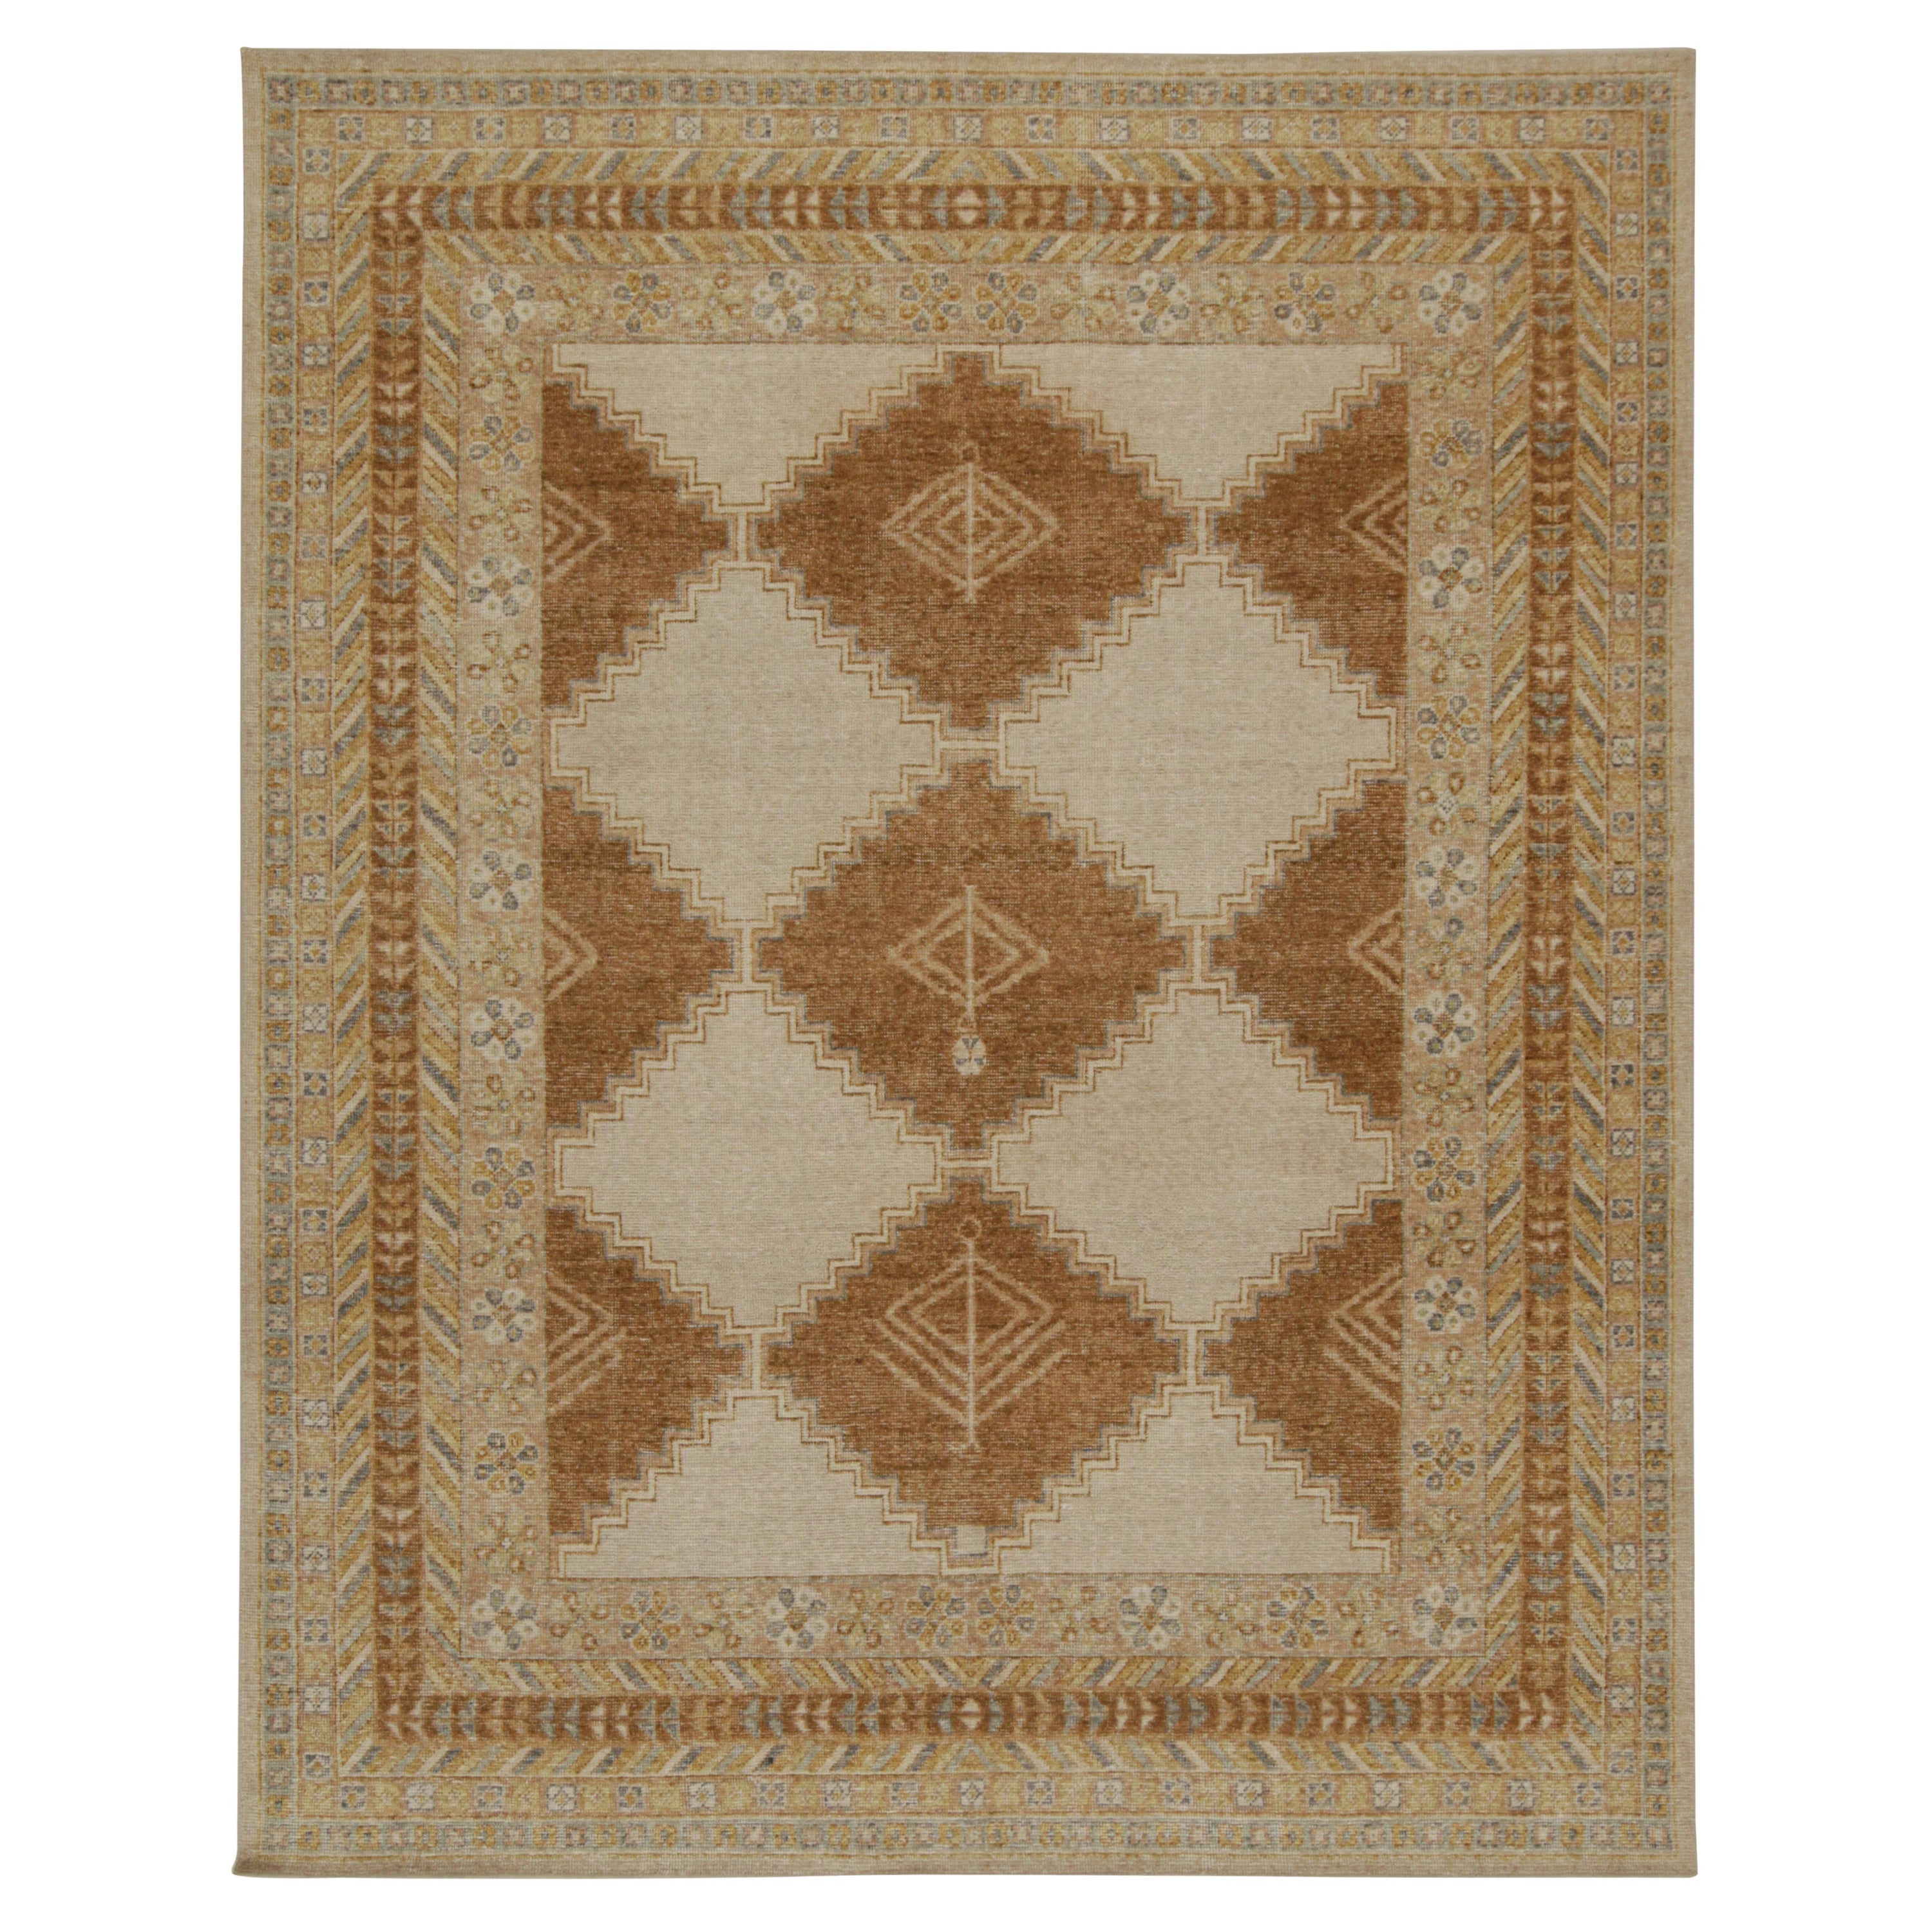 Rug & Kilim’s Distressed Tribal Style Rug in Beige, Brown and Gold Patterns For Sale